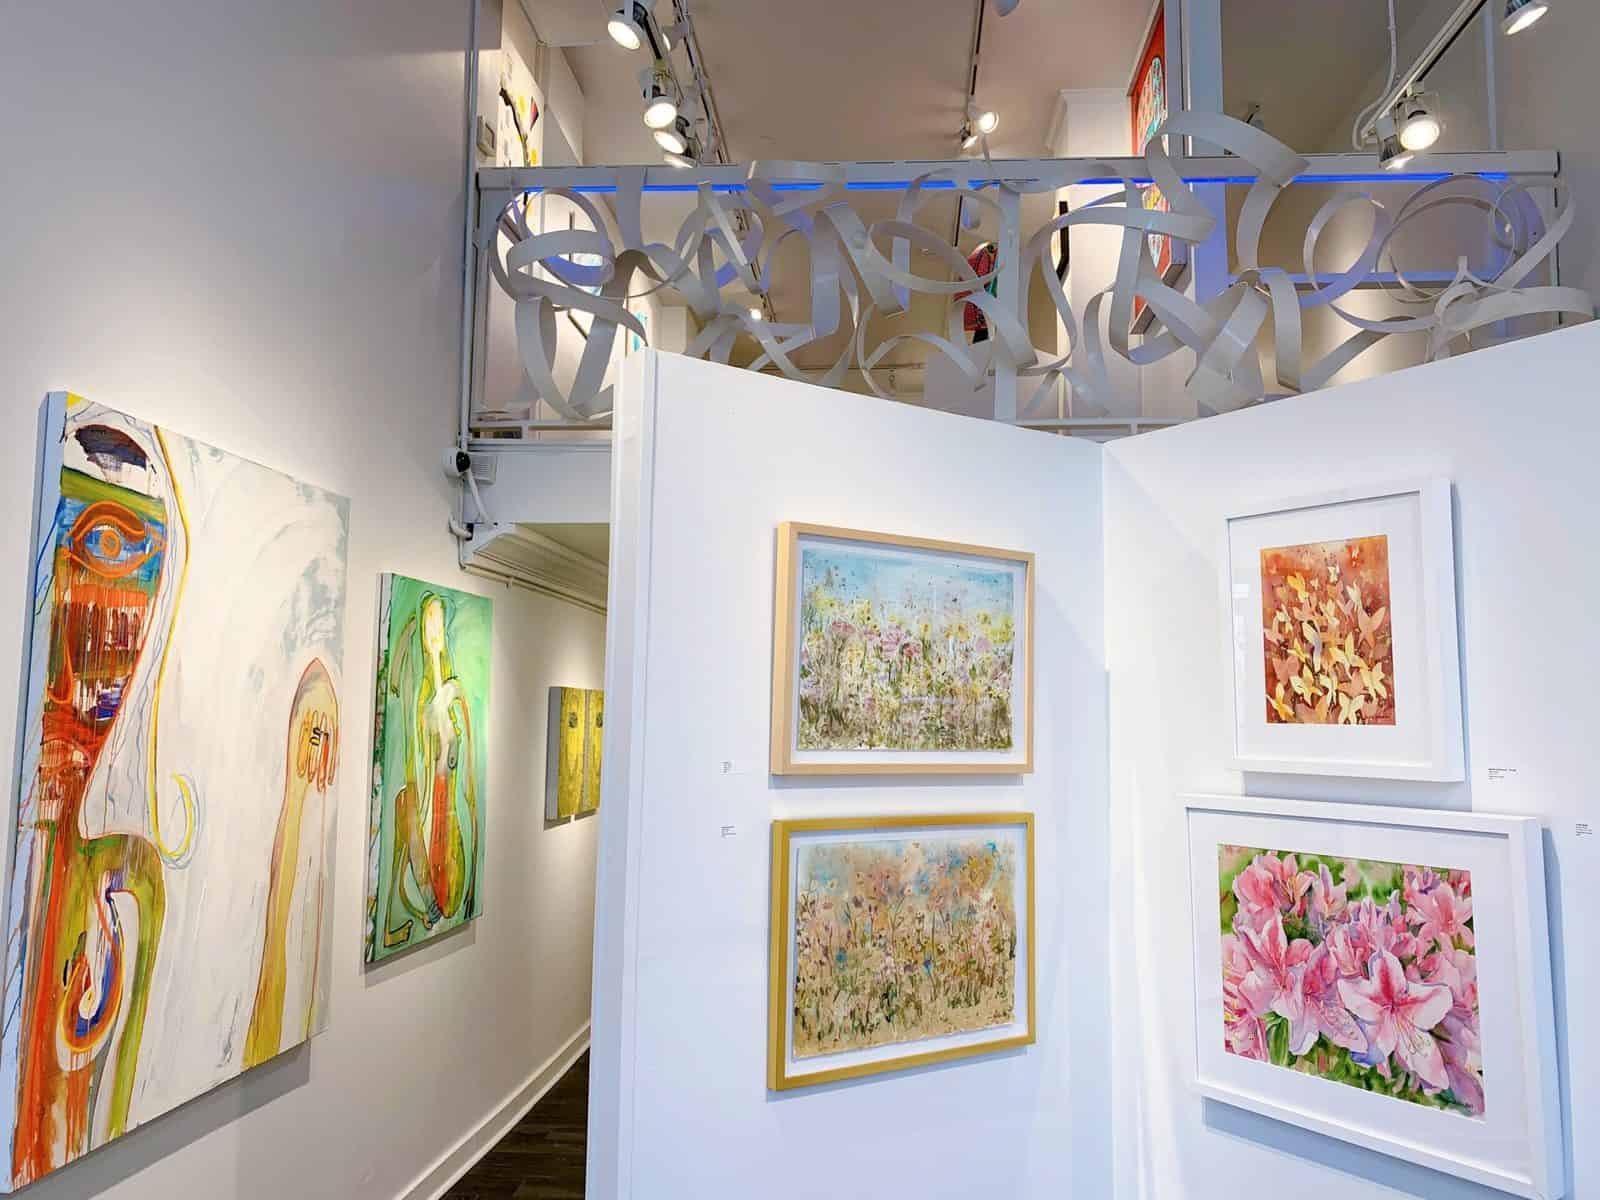 Cerulean Gallery is a contemporary fine art gallery